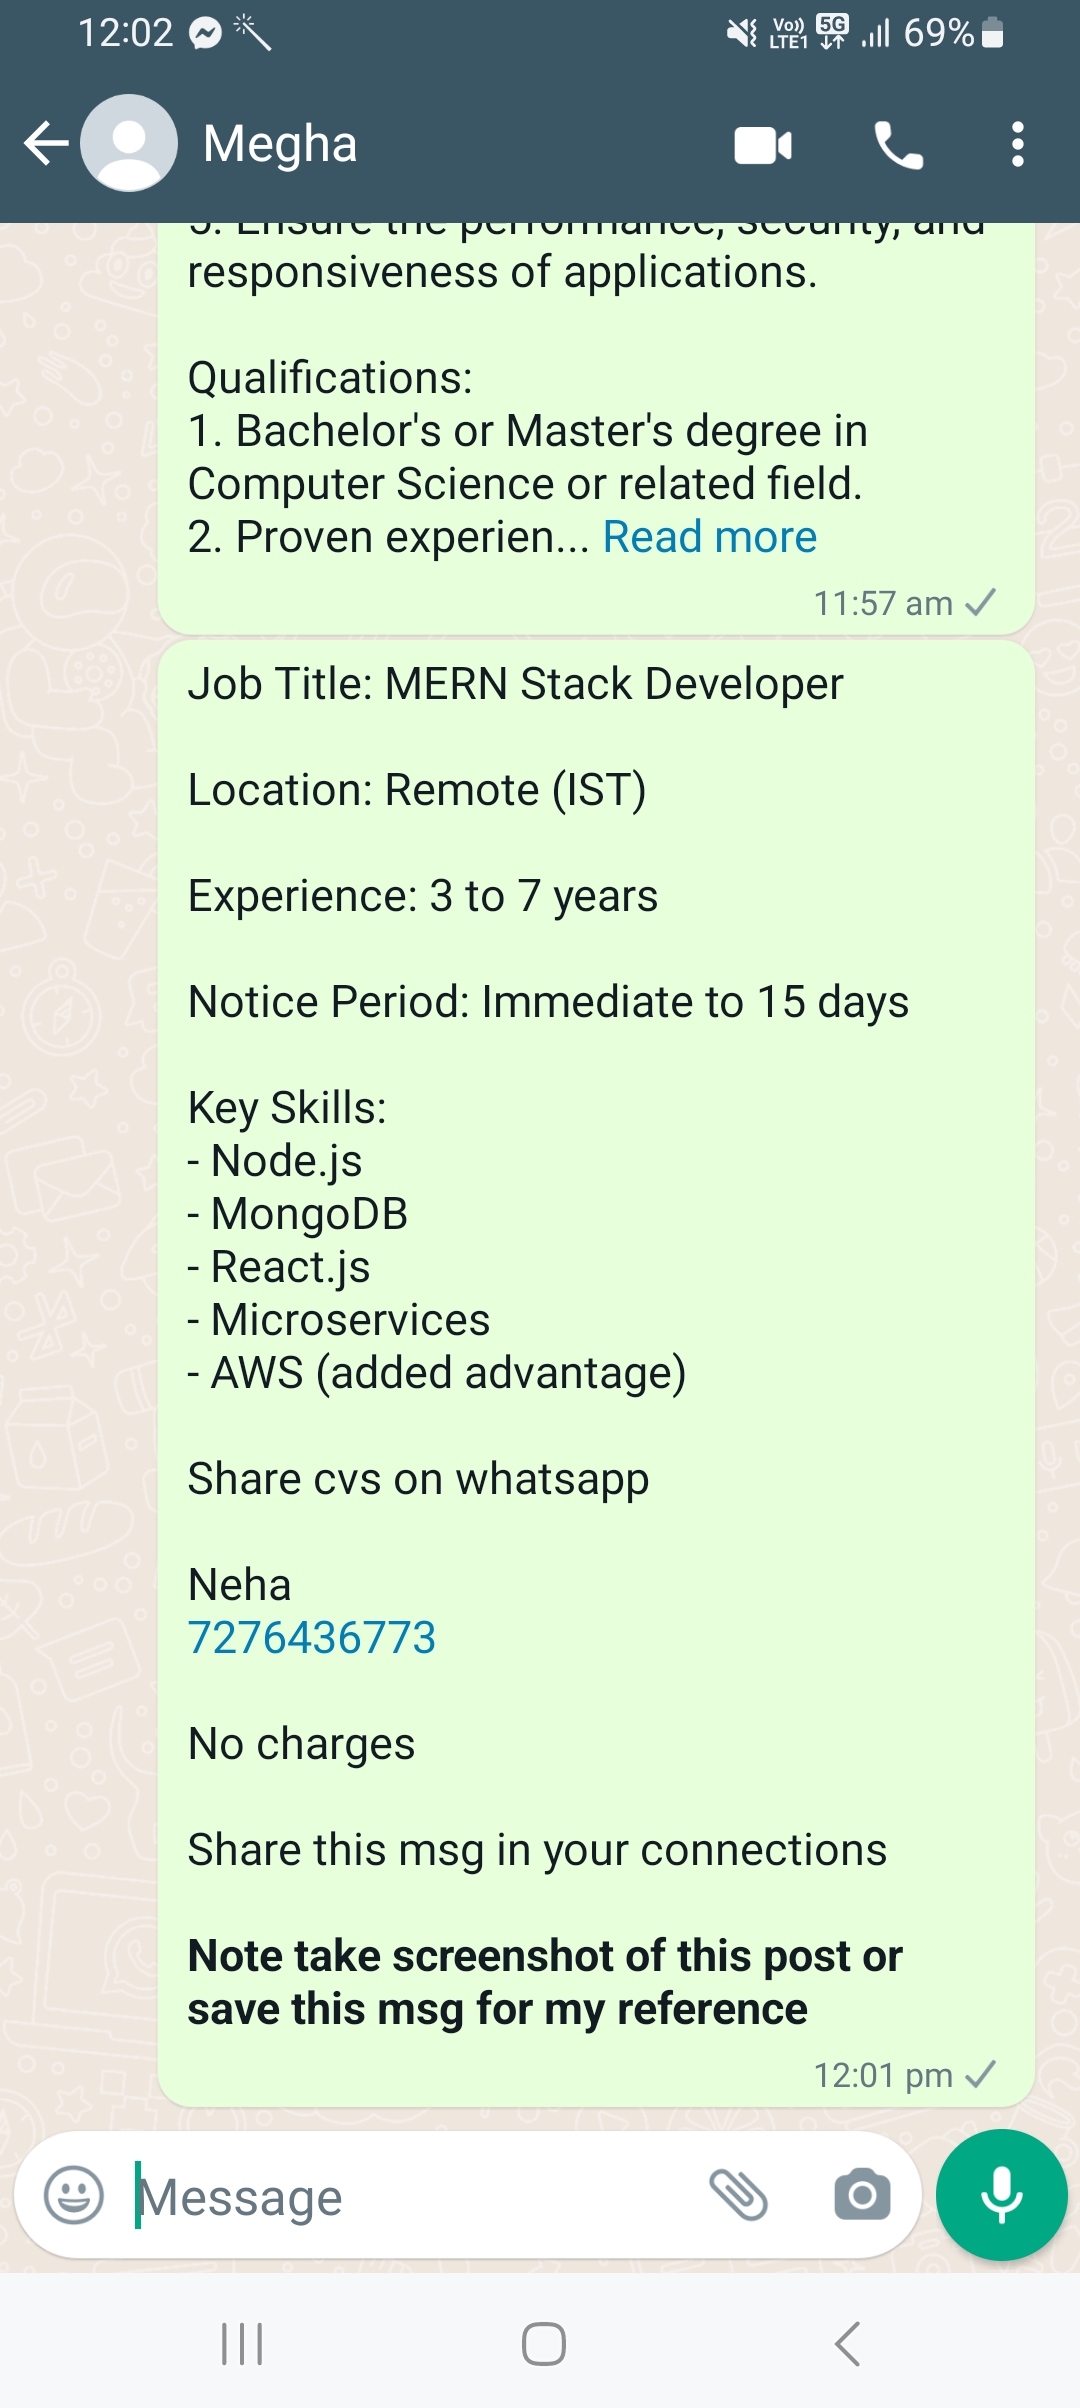 12:02 © \ LRN GIR

   

53 Megha

responsiveness of applications.

Qualifications:

1. Bachelor's or Master's degree in
Computer Science or related field.
2. Proven experien... Read more

11:57 am
Job Title: MERN Stack Developer
Location: Remote (IST)
Experience: 3 to 7 years
Notice Period: Immediate to 15 days
Key Skills:
- Node.js
- MongoDB
- React js
- Microservices
- AWS (added advantage)

Share cvs on whatsapp

Neha
7276436773

No charges
Share this msg in your connections

Note take screenshot of this post or
save this msg for my reference

12:01 pm

Obs © 0 (@)
<

I Oo